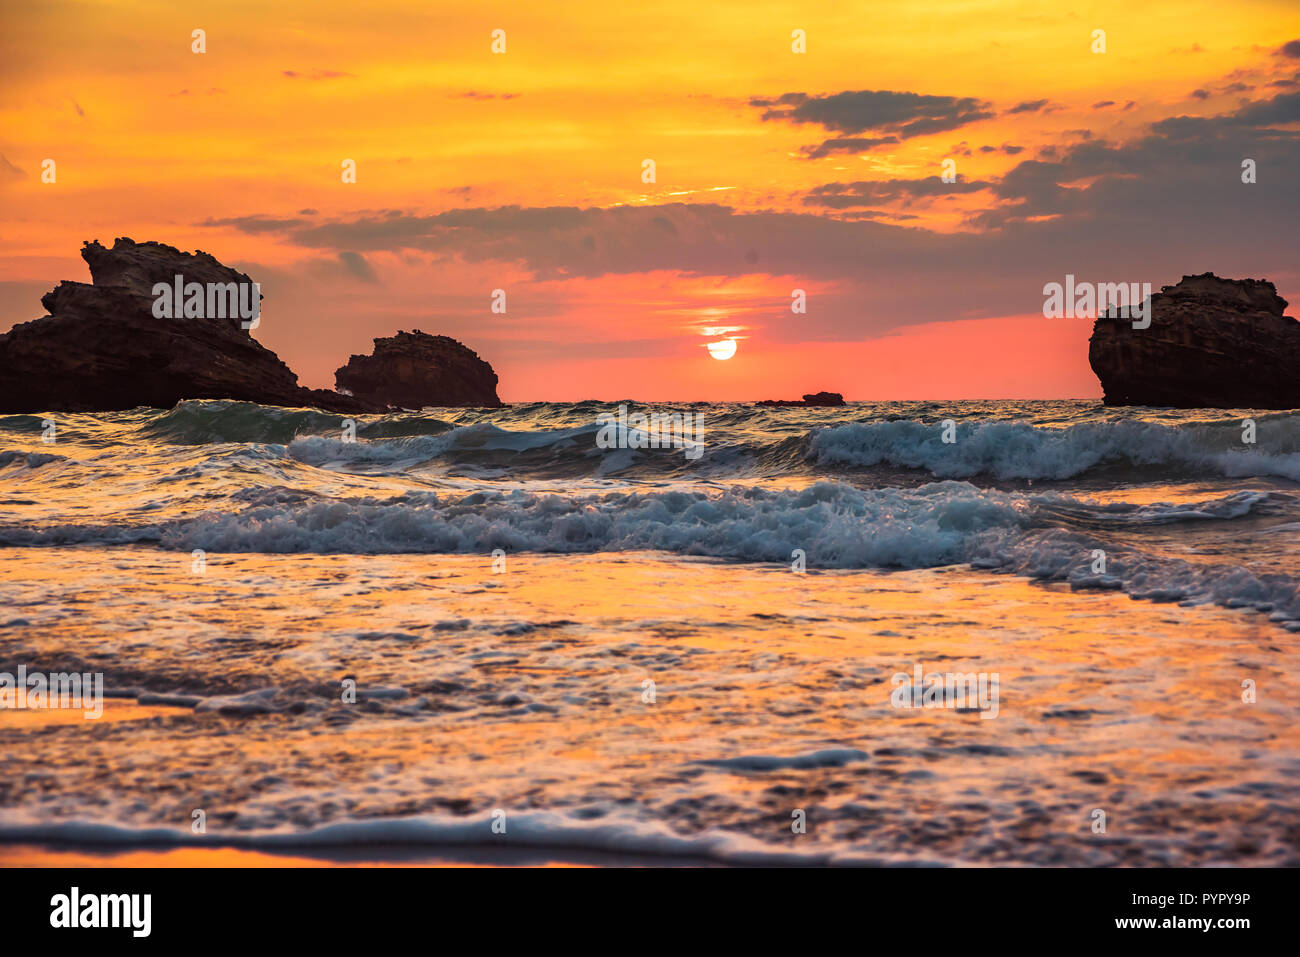 Spectacular sunset seen from the beach in Biarritz, France Stock Photo